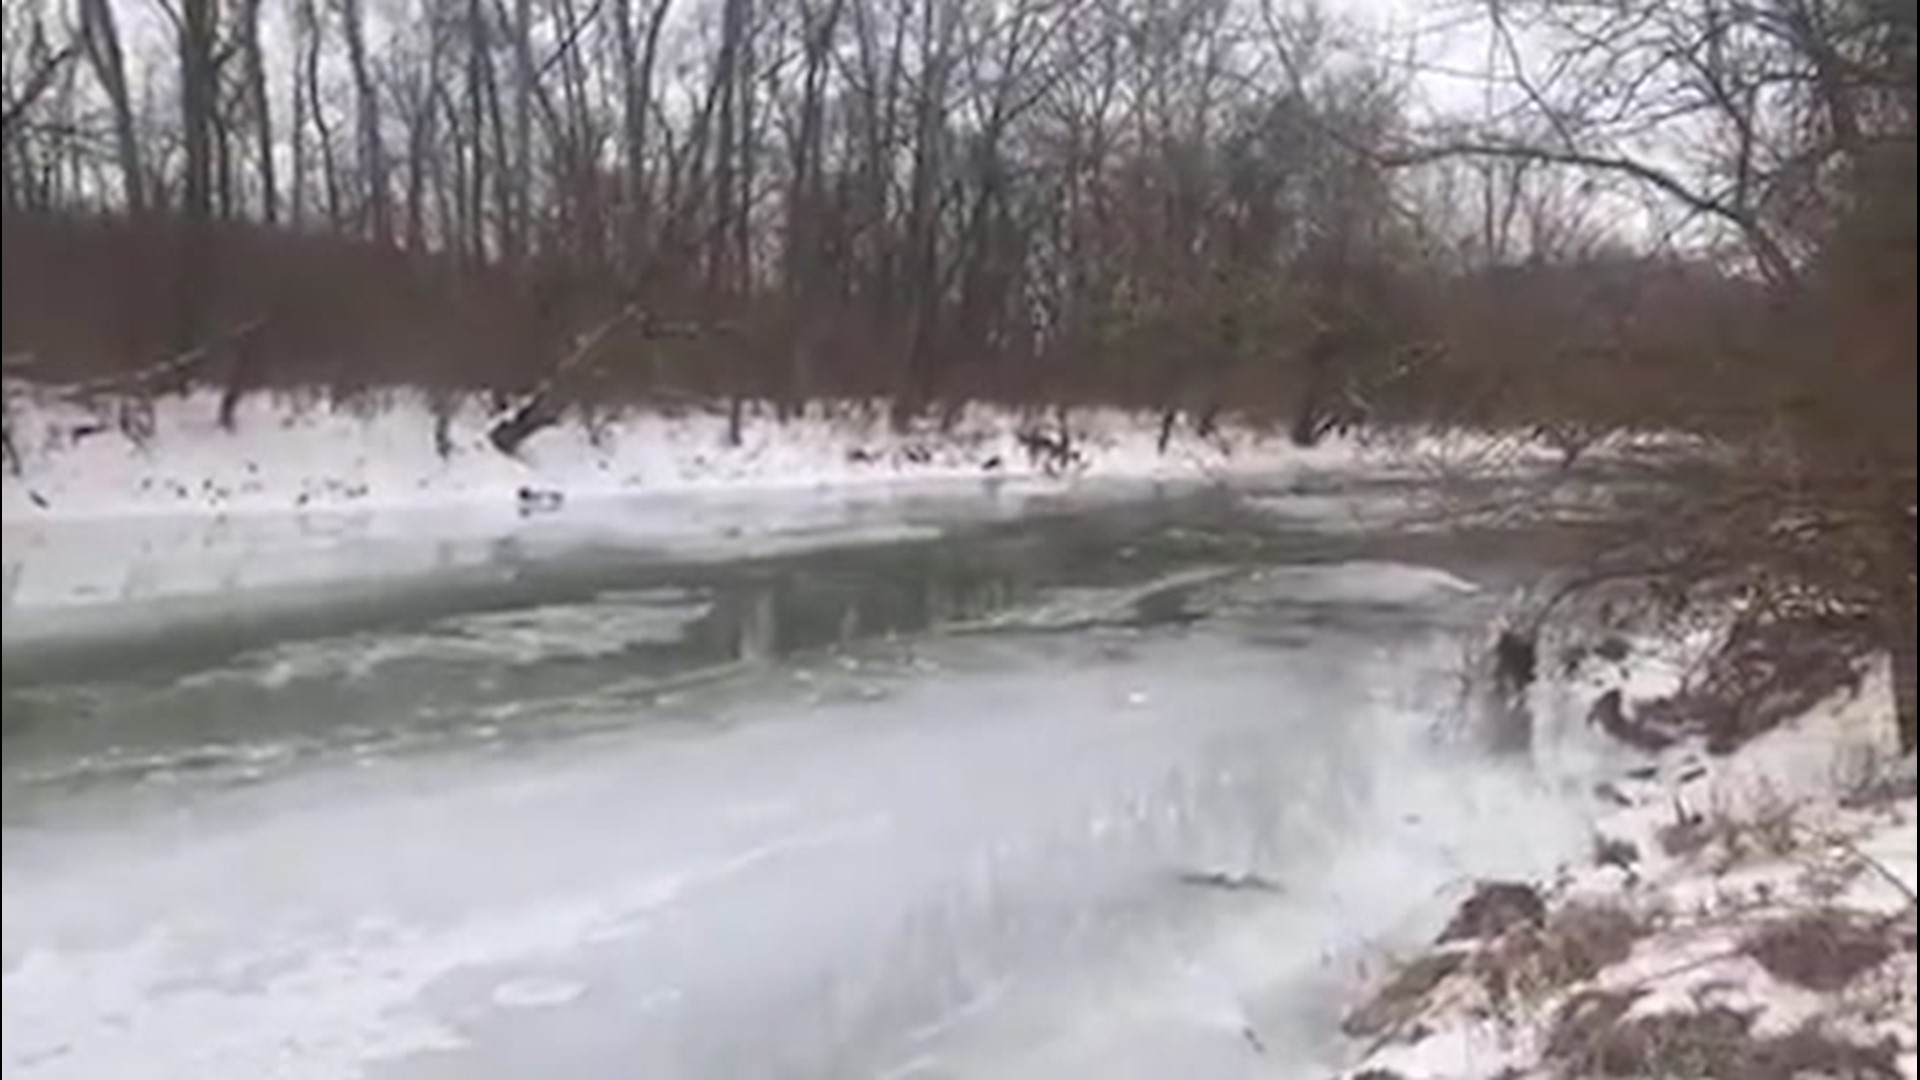 You can hear constant cracking in the ice as the Twin Creek, in Germantown MetroPark, thawed on Feb. 26.